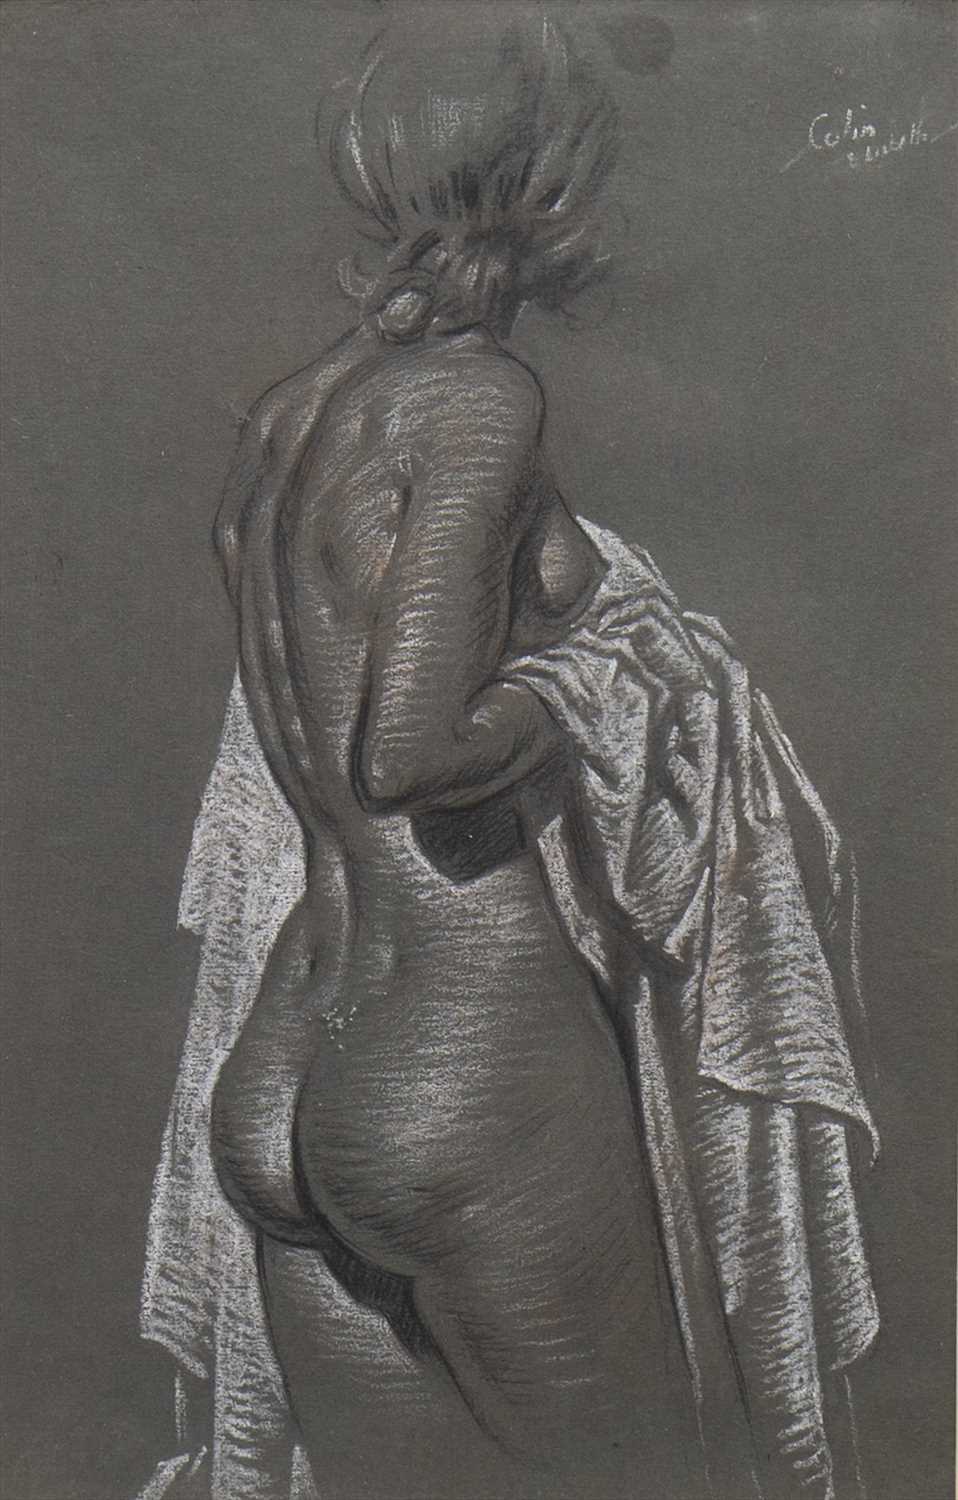 Lot 423 - WOMAN WITH WHITE CLOTH, A CHARCOAL BY COLIN GIBSON